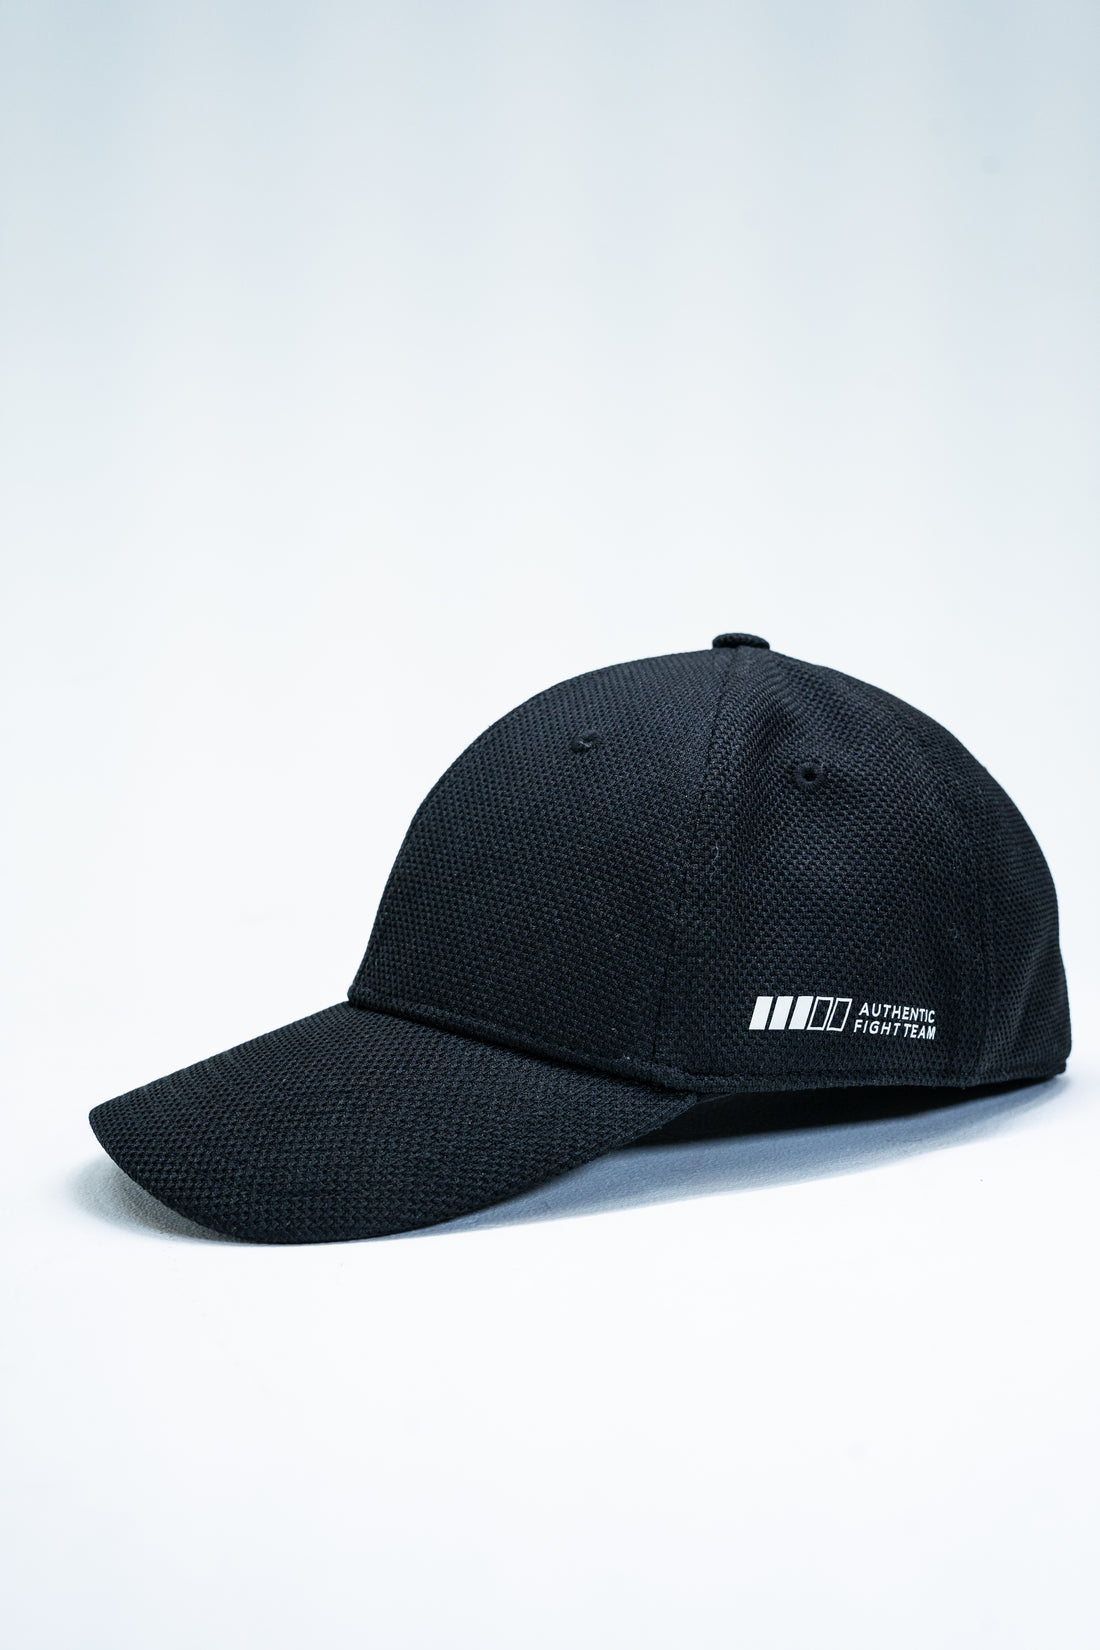 StreetFight Casquette Athletic Black SF024